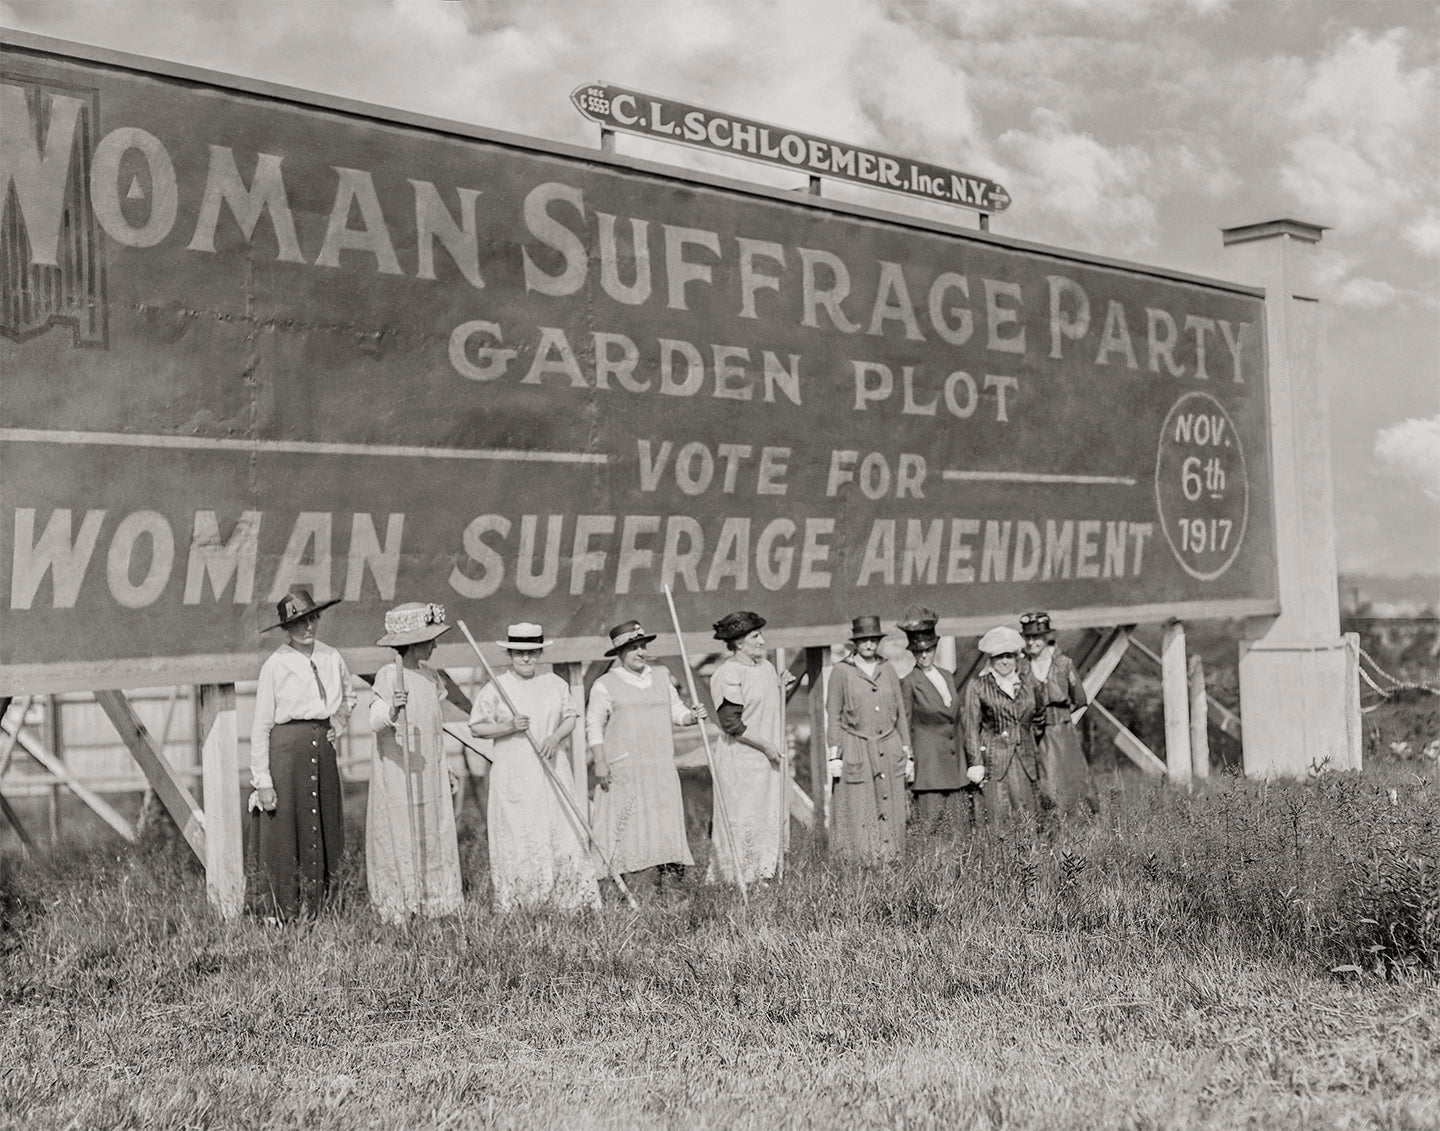 Model War Victory Garden of the Woman Suffrage Party, 1917 Historical Pix